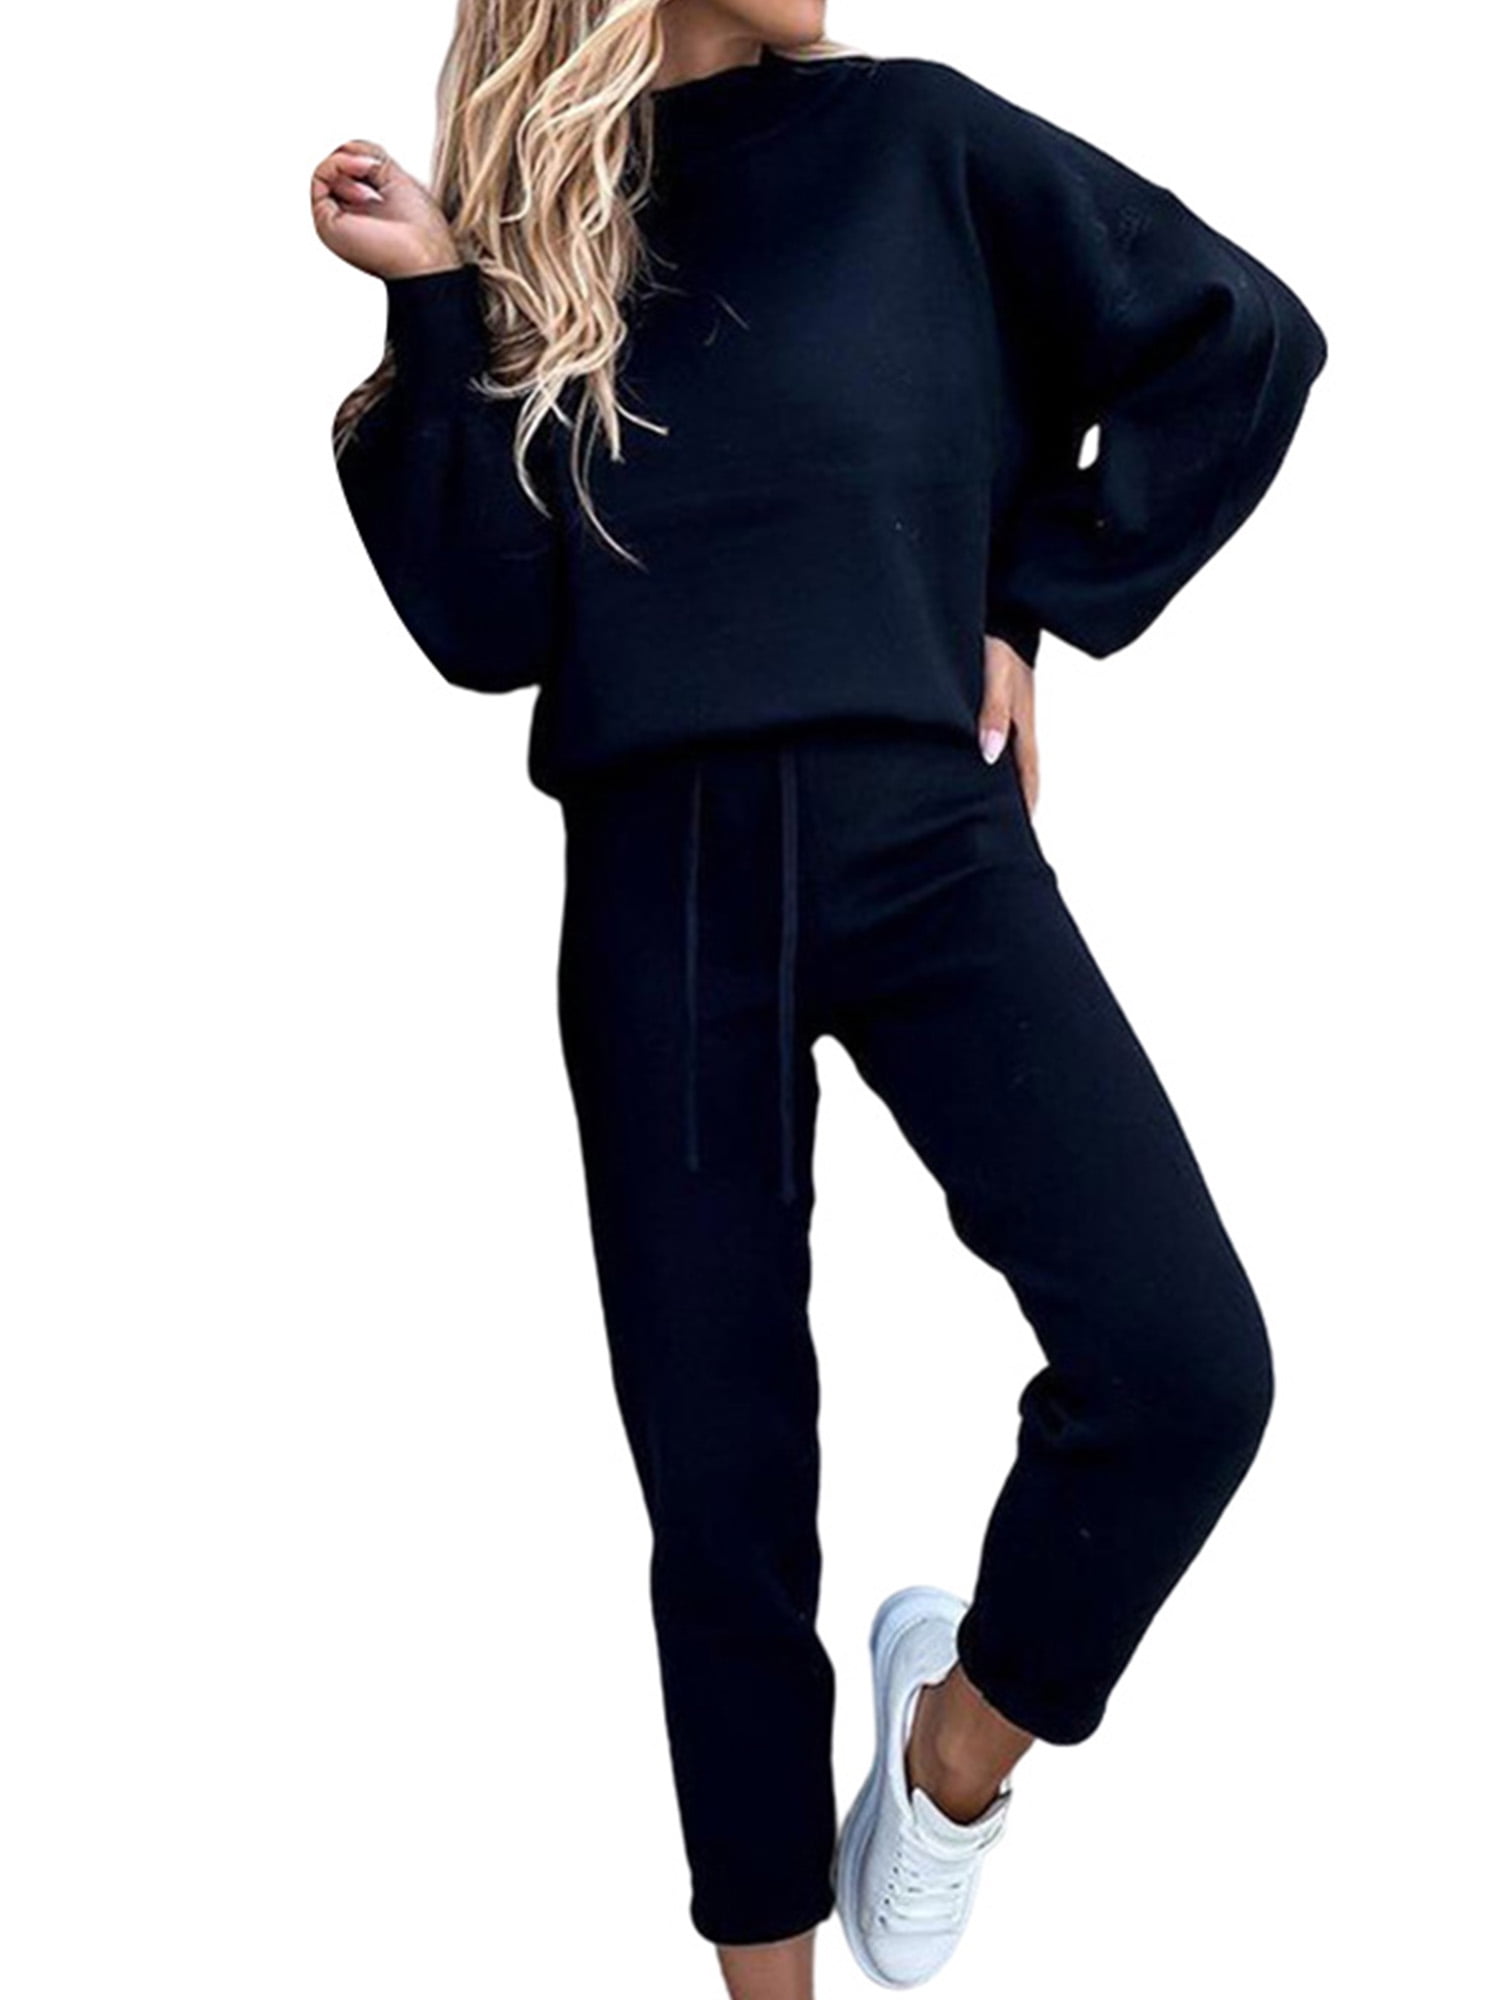 Grianlook Women Sweatsuits Long Sleeve Jogger Set Solid Color Loose Fit ...